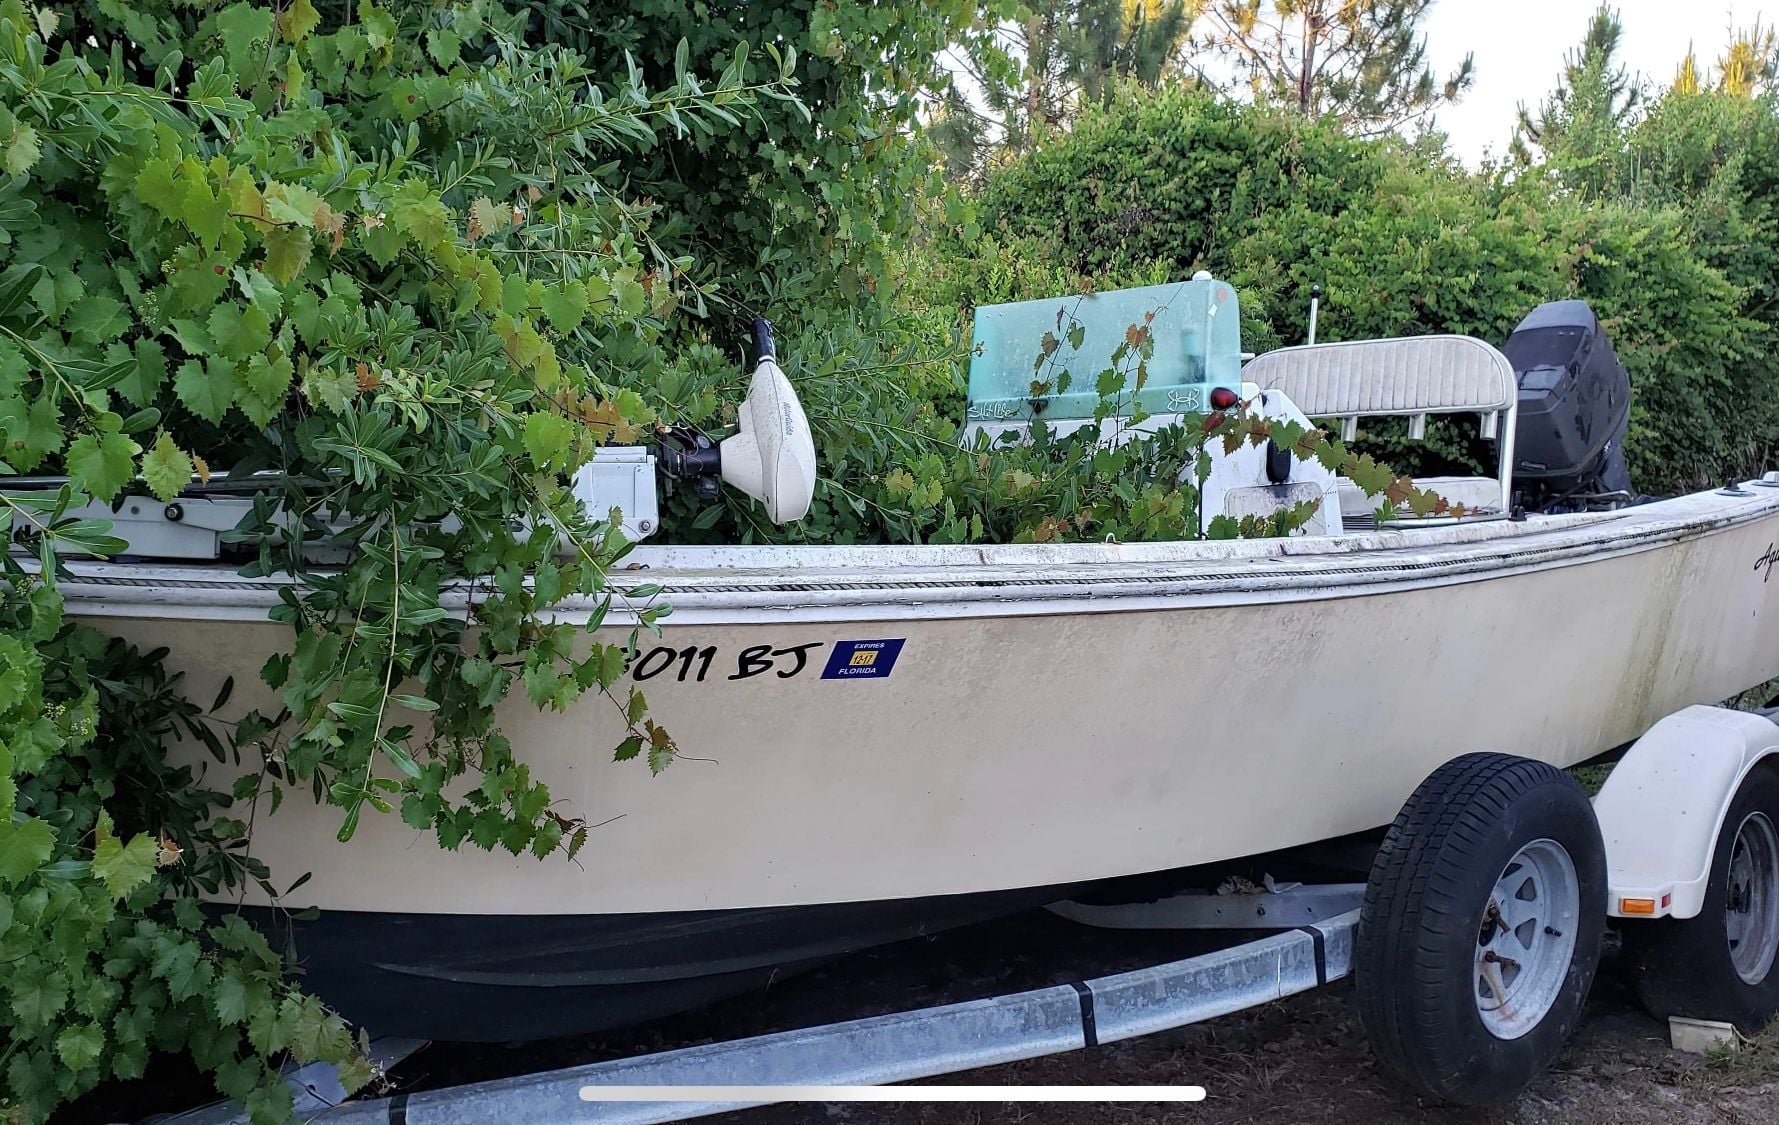 I BOUGHT AN OLD BOAT FOR $1,000  FISHING BOAT RESTORATION 